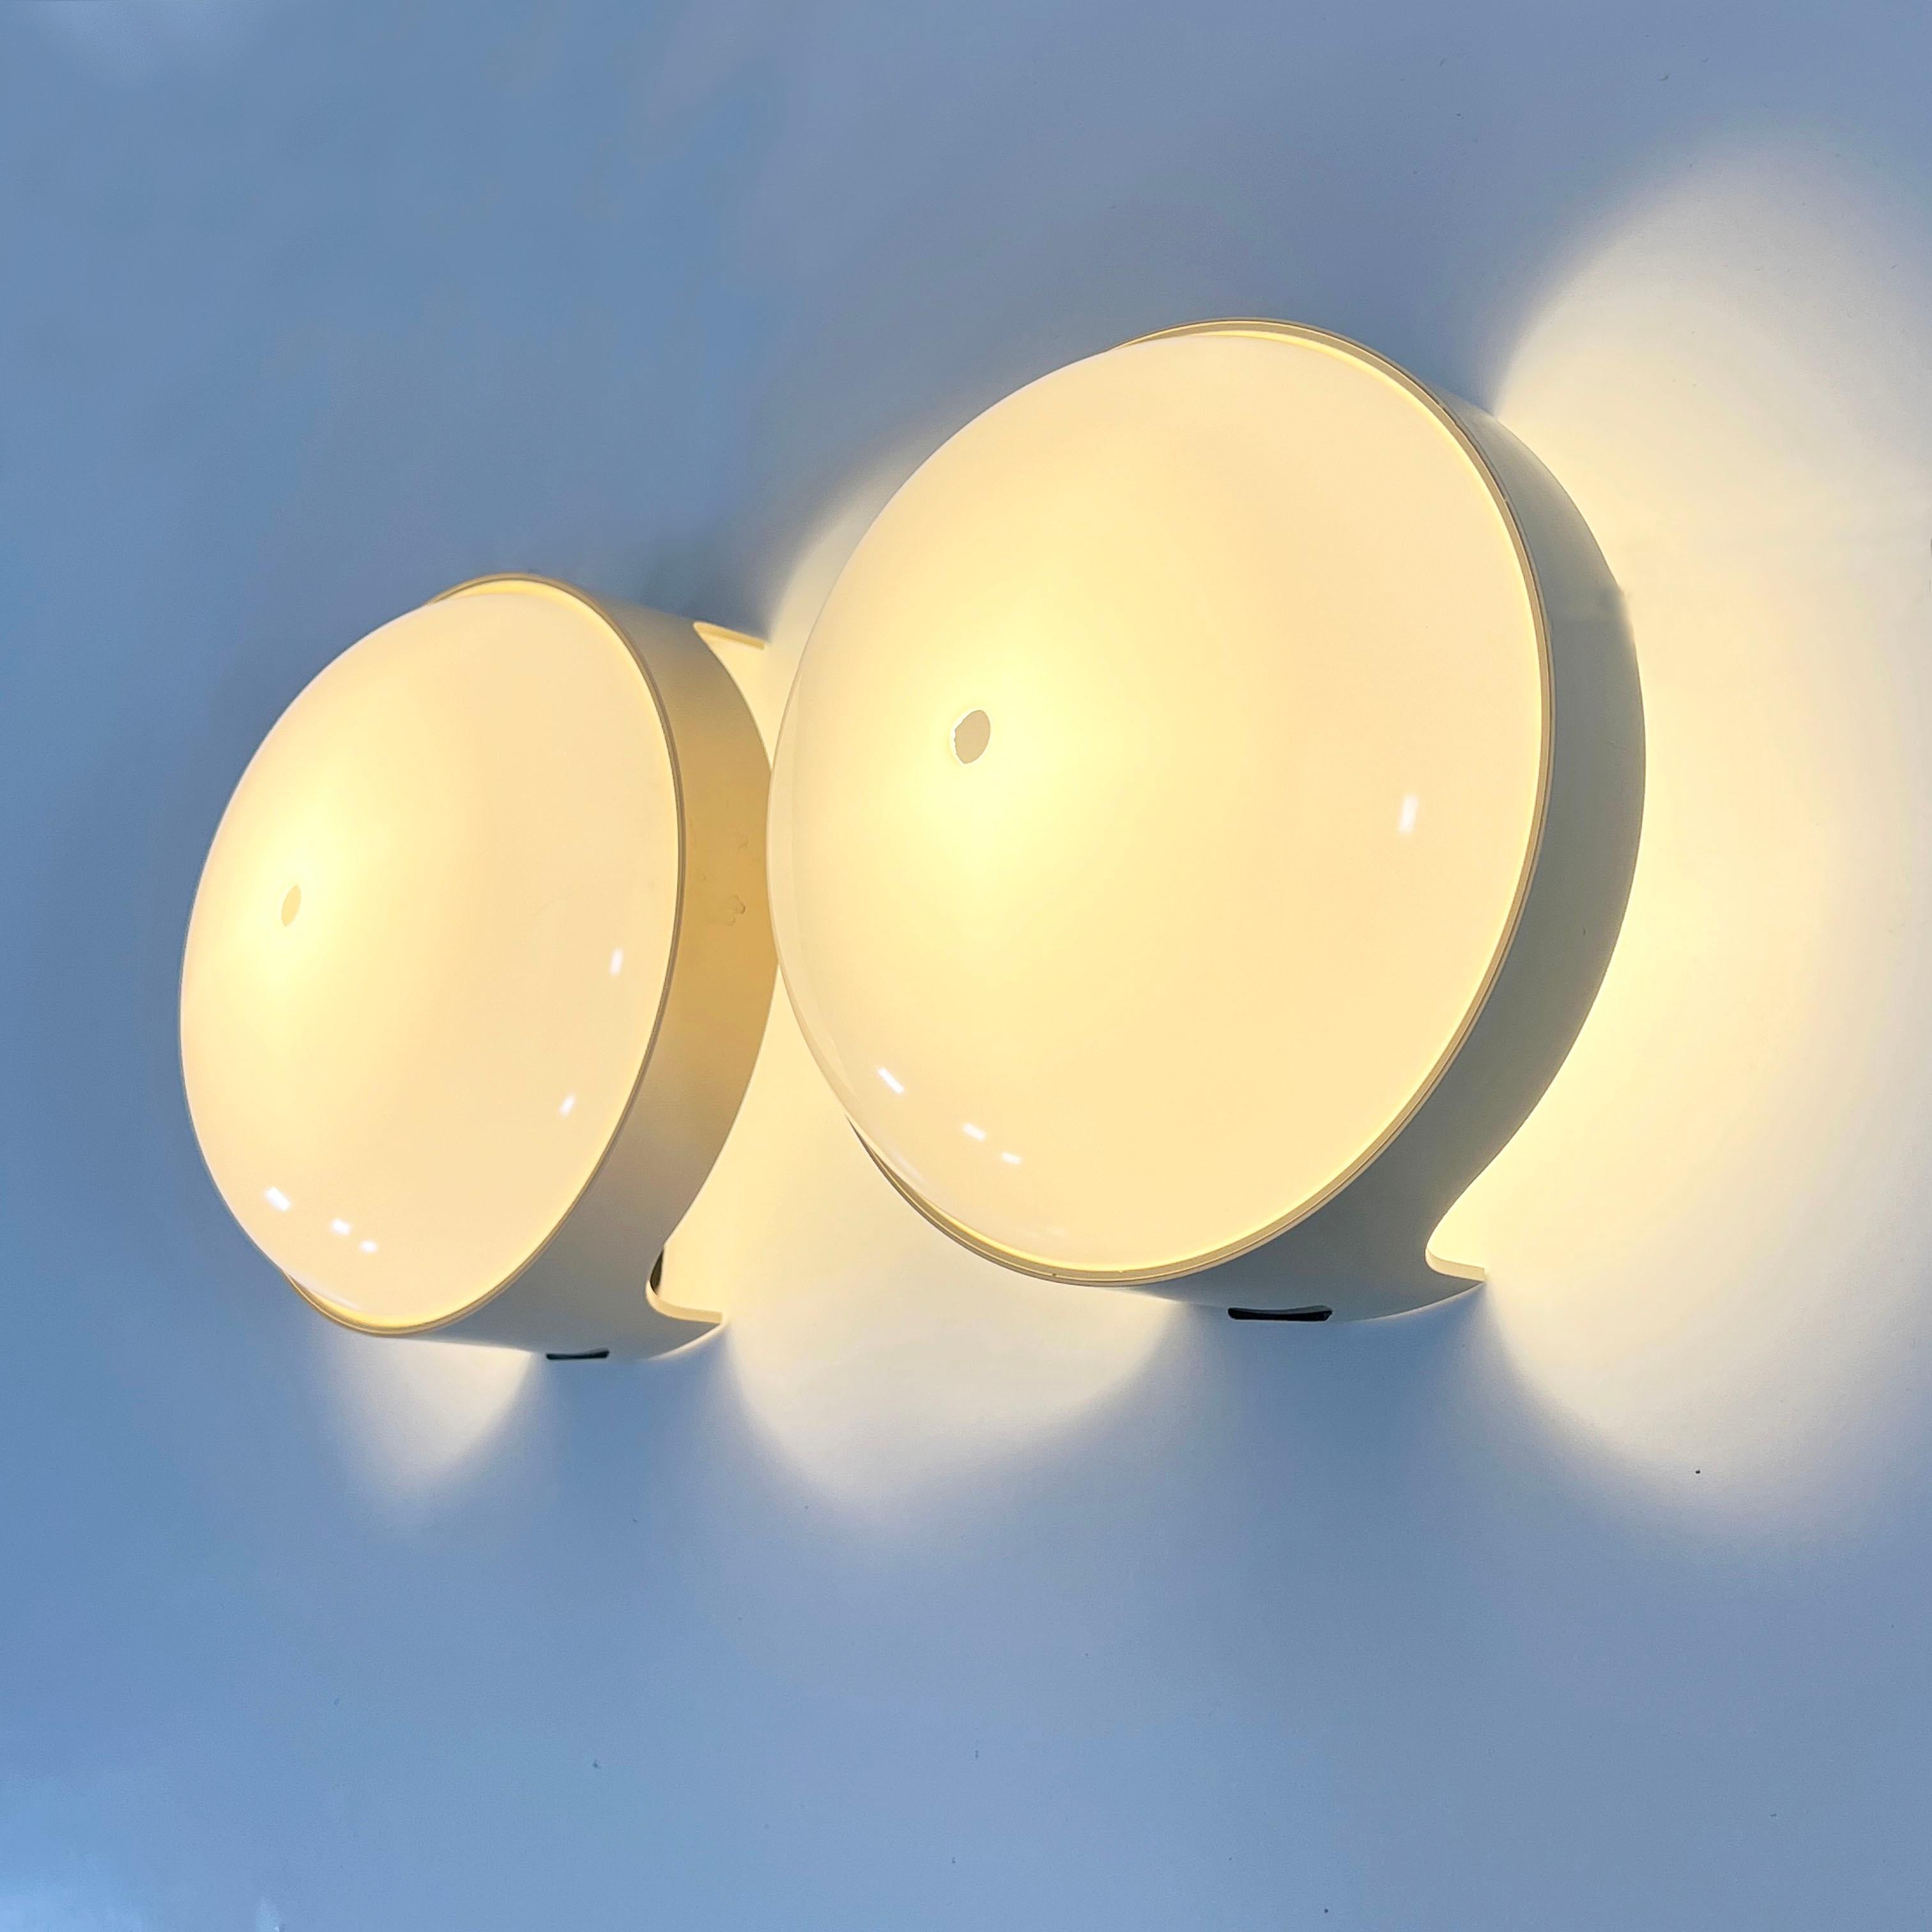 Mid-20th Century Pair of Quattro KD 4335 Wall Lamps by Joe Colombo for Kartell, 1960 For Sale